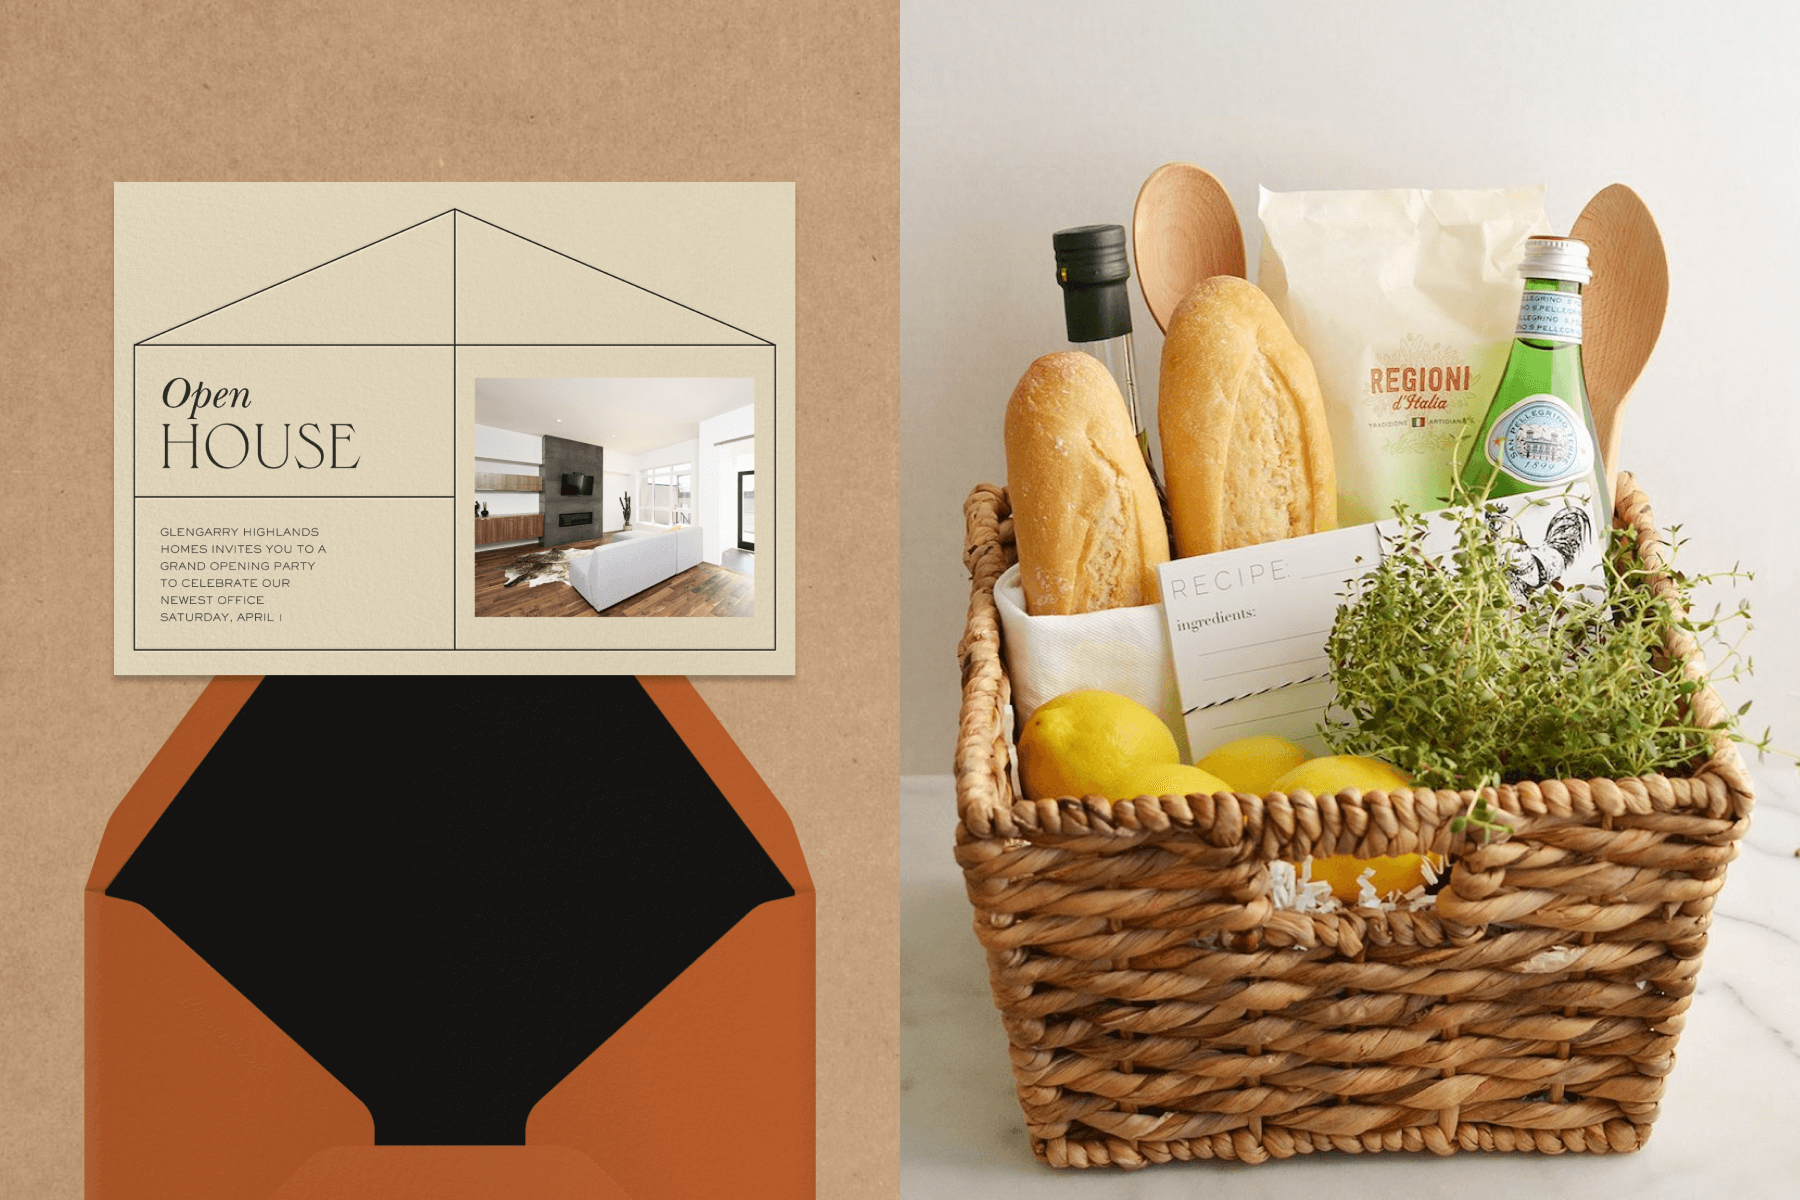 Left: An open house invitation with a simplified house framework, the words “Open House” in a left quadrant, and a photo of a living room with a white couch and black fireplace on the right. Right: A square basket holds bread, sparkling water bottles, microgreens, lemons, spoons, recipe cards, and cooking oil.